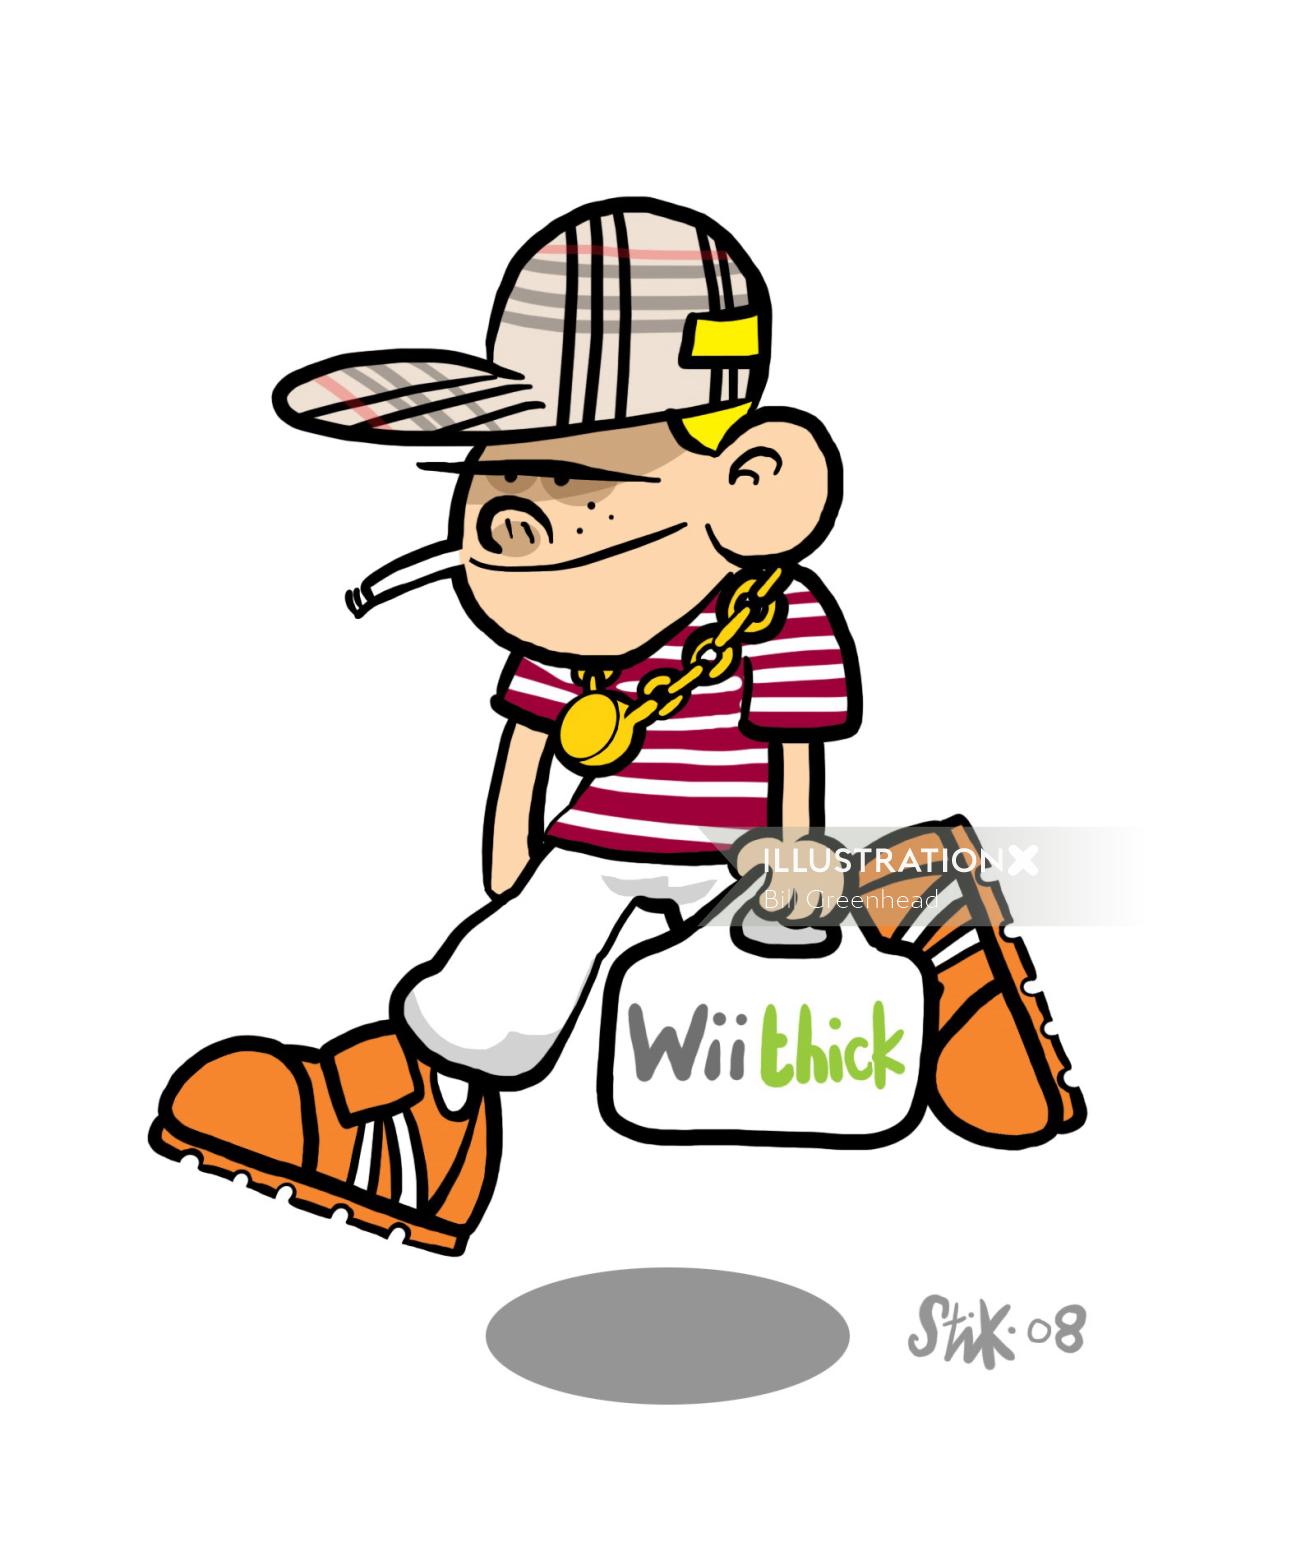 Character design of Man with will thick bag